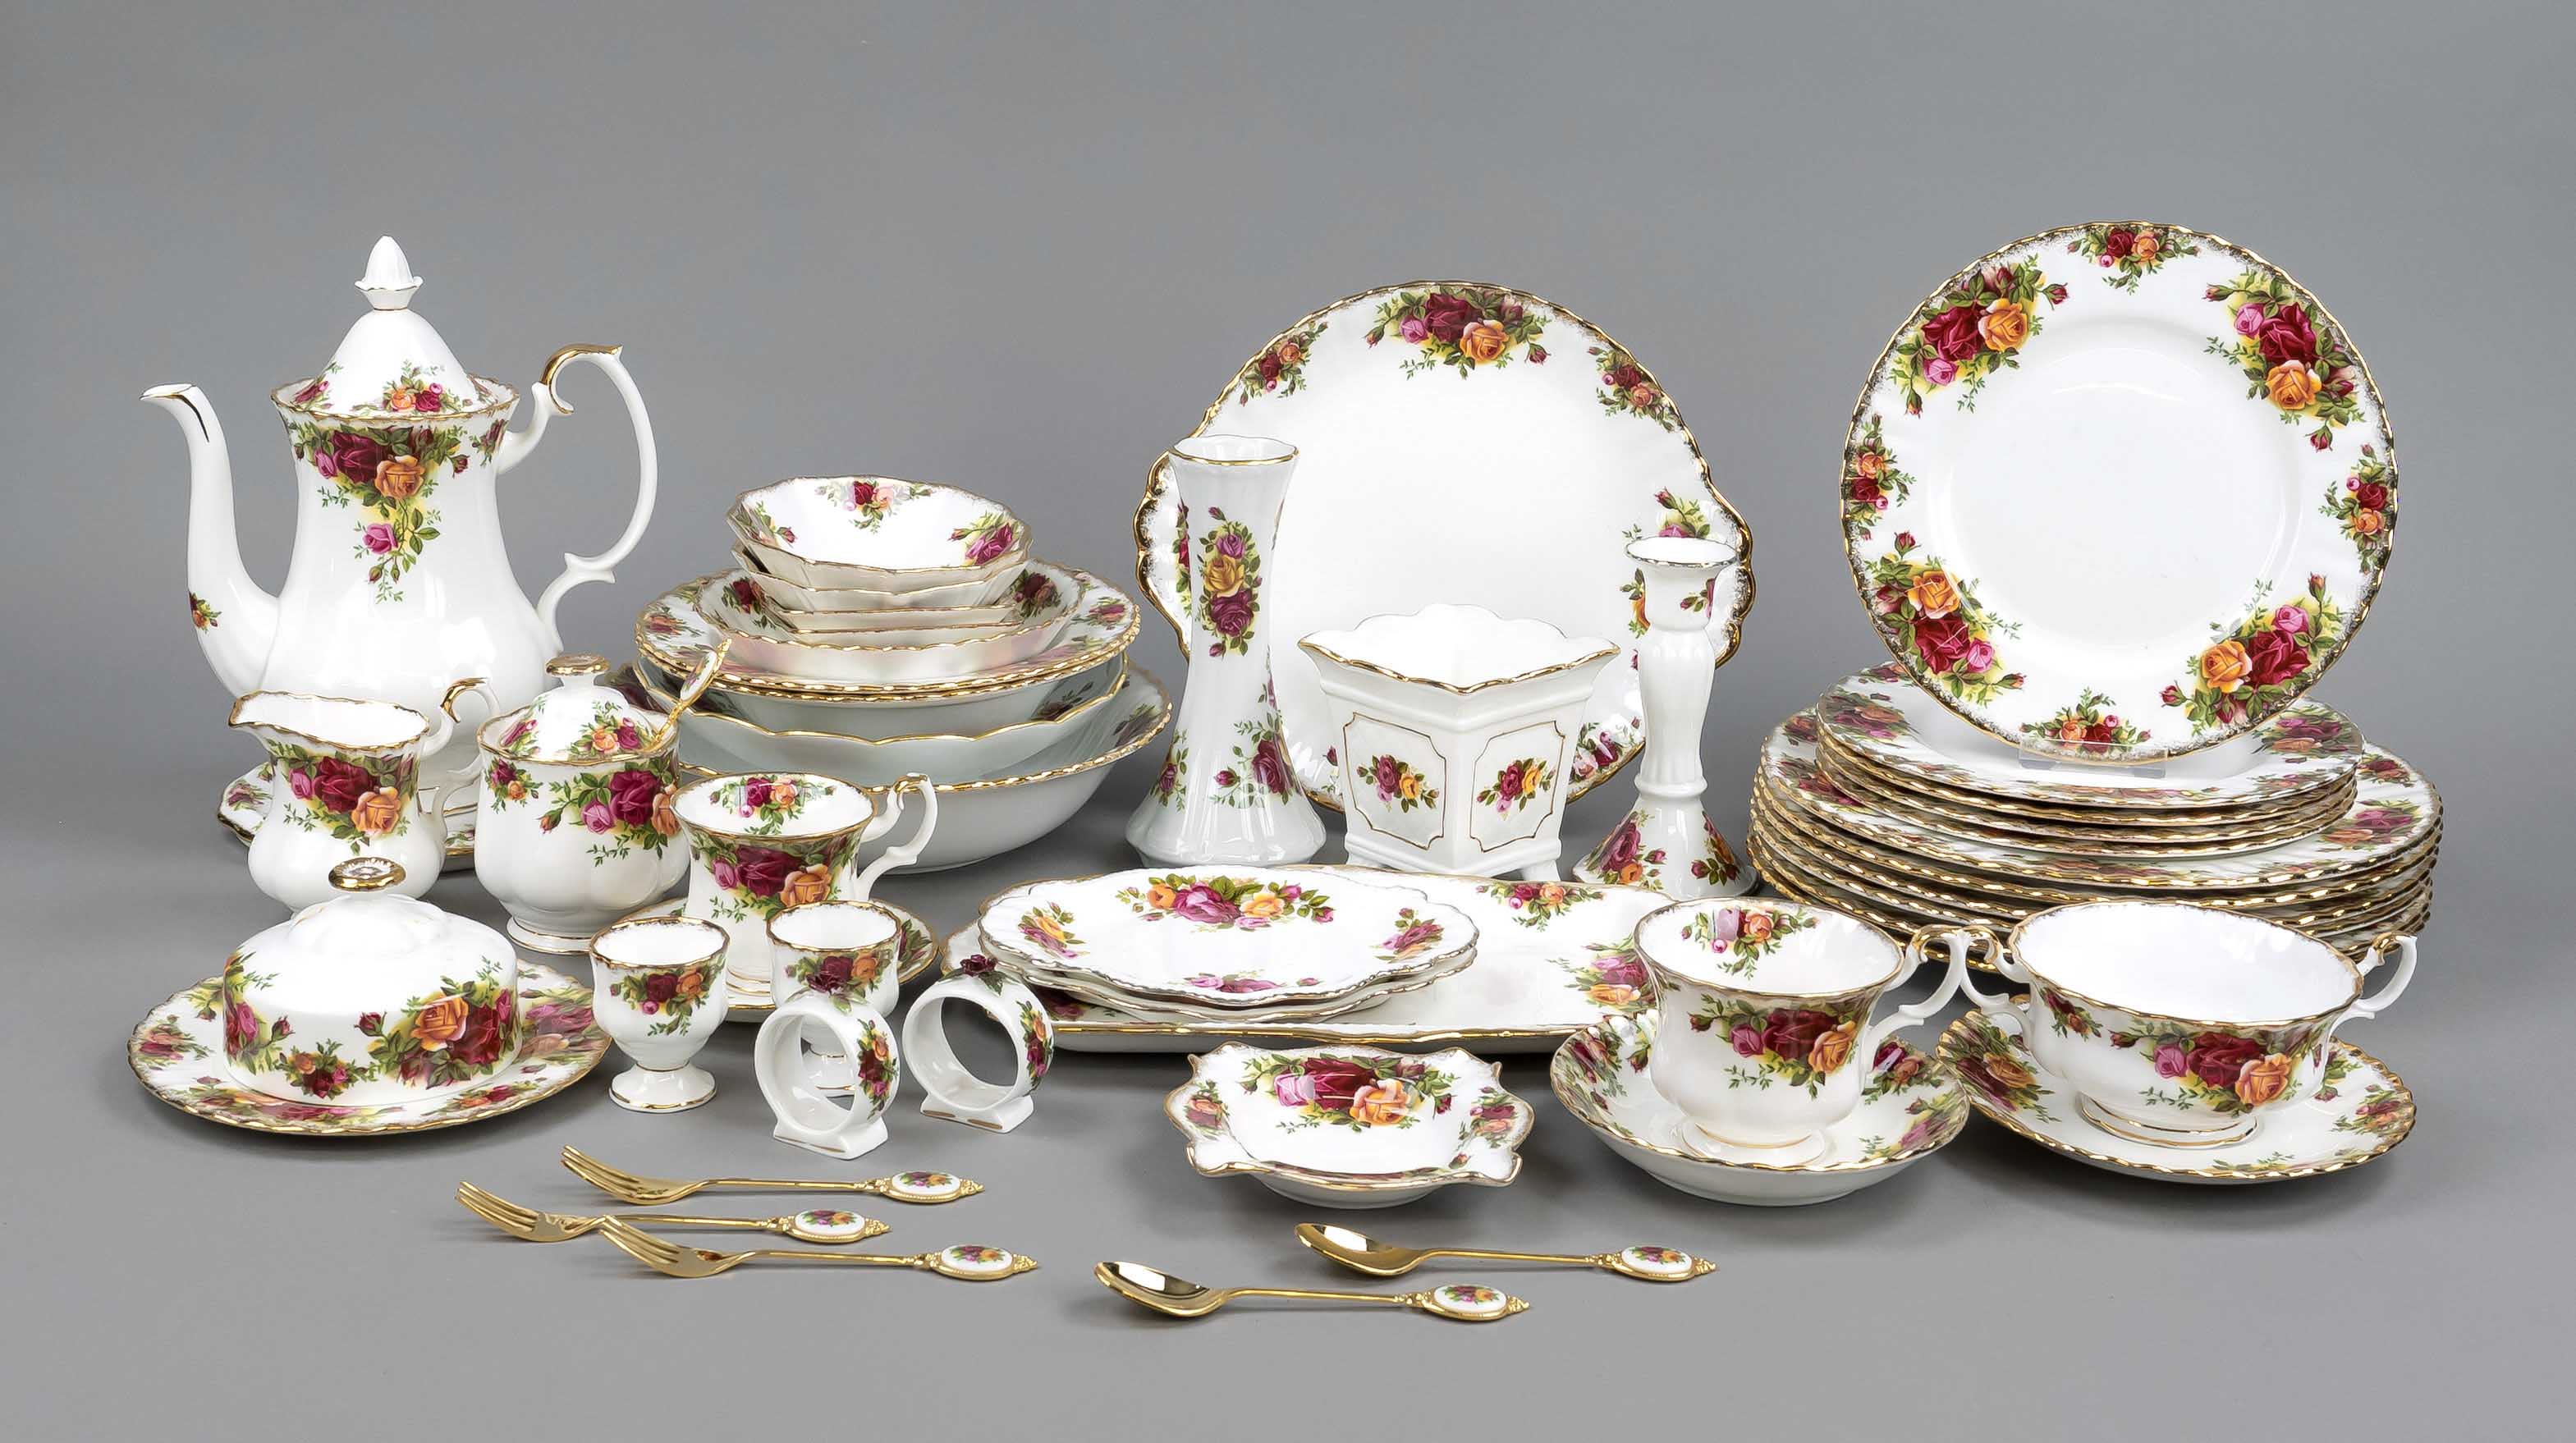 Large remainder service, 87-piece, England, mostly Royal Albert, 20th c., model, Old Country